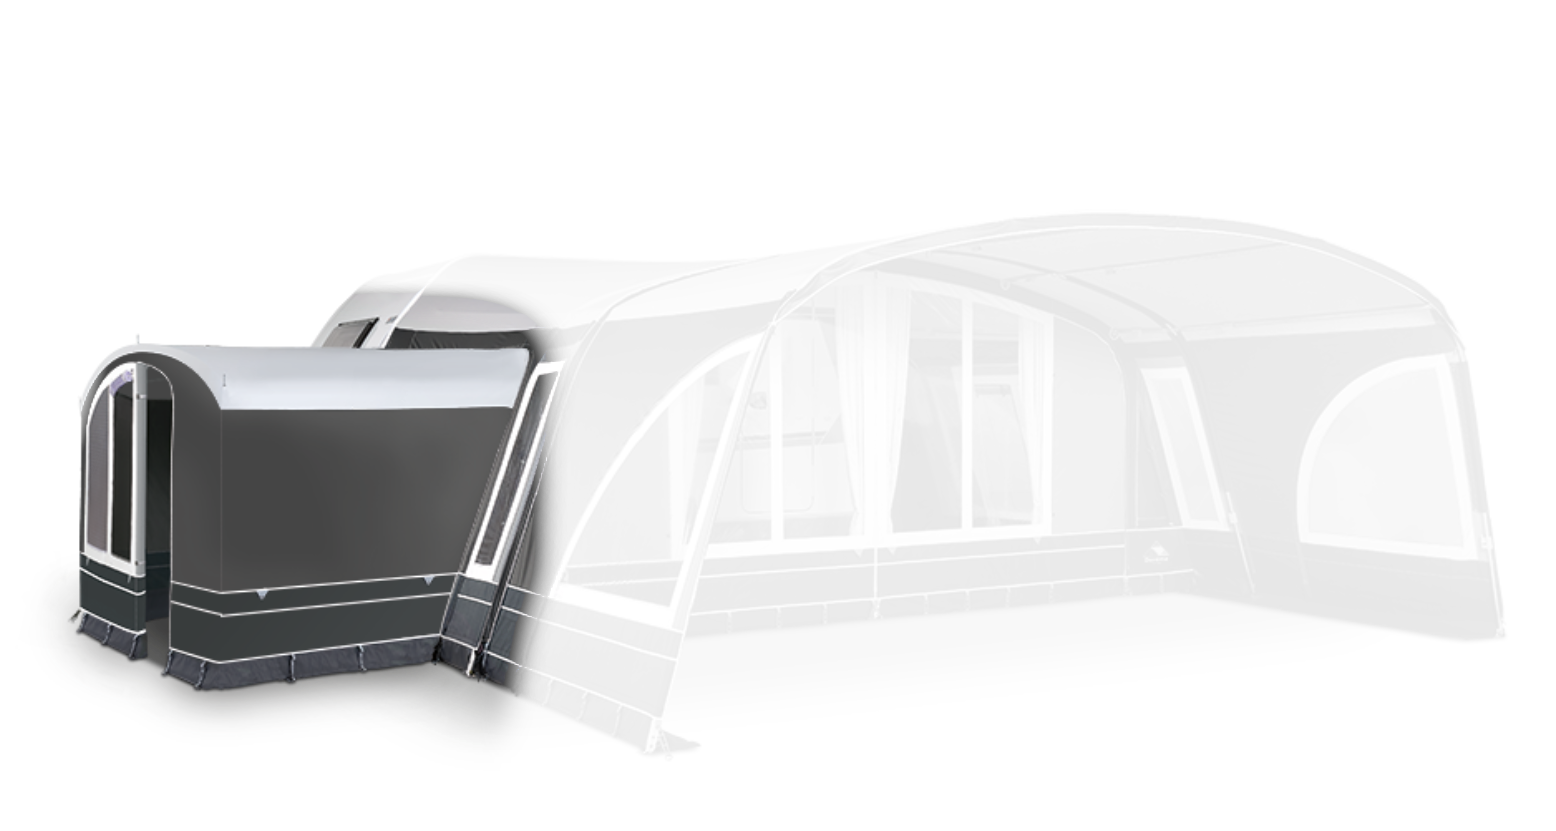 dorema onyx 270 annex deluxe xl with curved roof, end windows and door